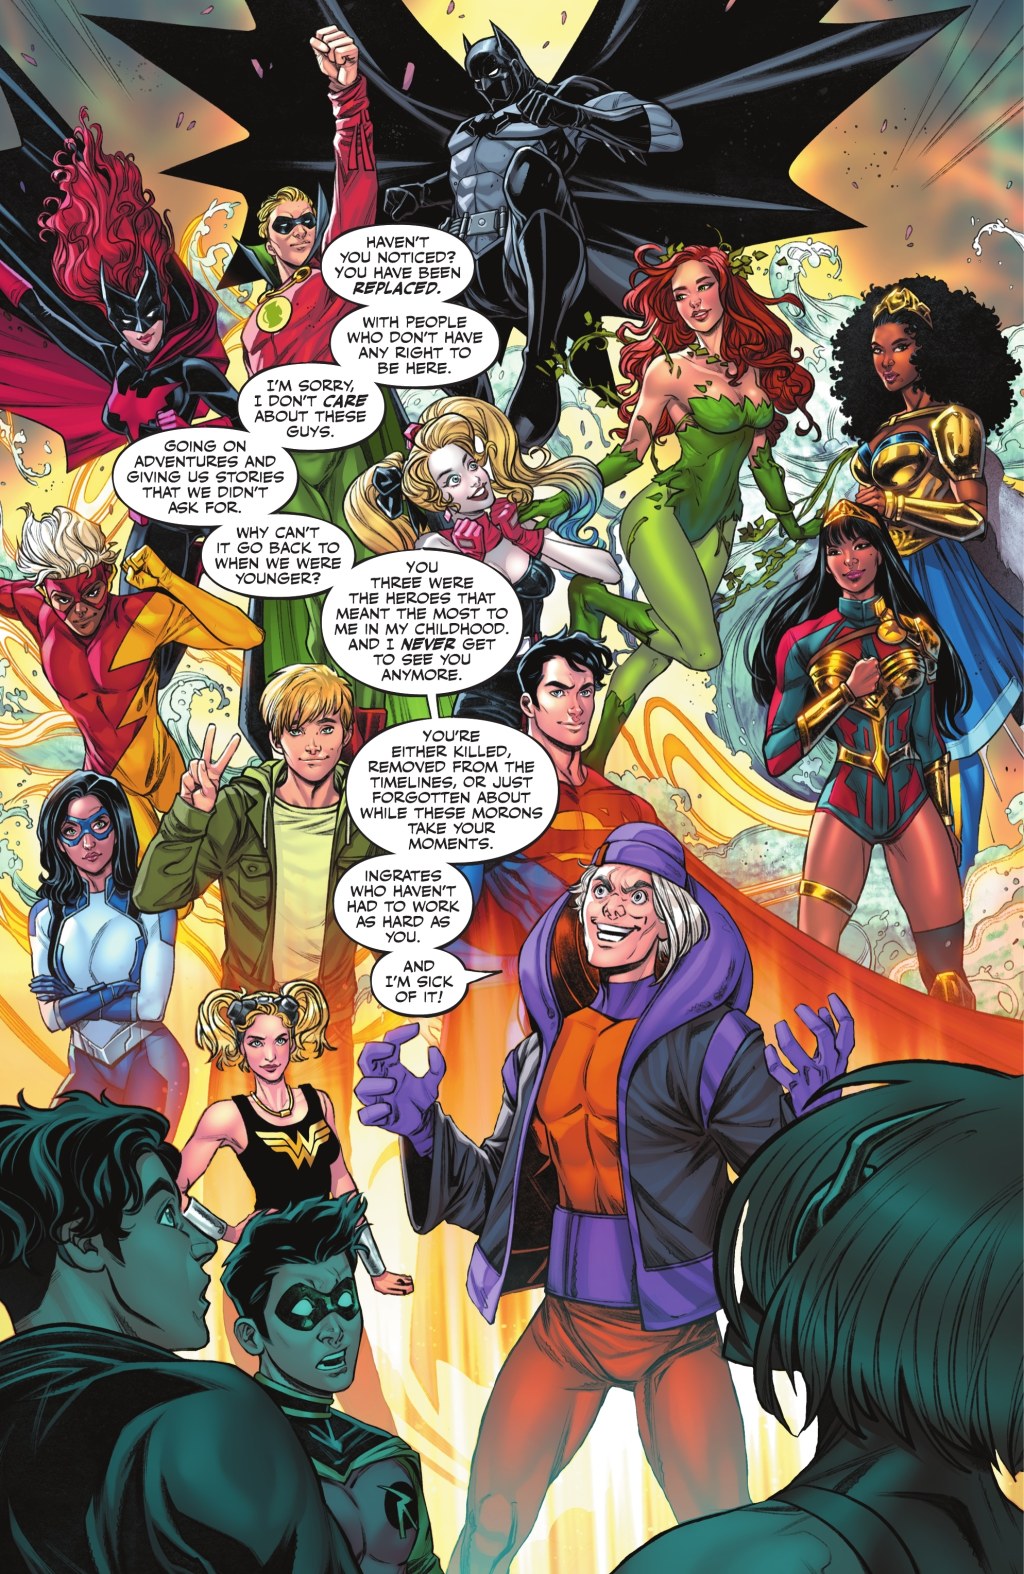 DC editorial reveals Mickey Mxyzptlk as a terrible strawman of comic book fans in Dark Crisis: Young Justice Vol. 1 #5 "Don't Meet Your Heroes" (2022), DC